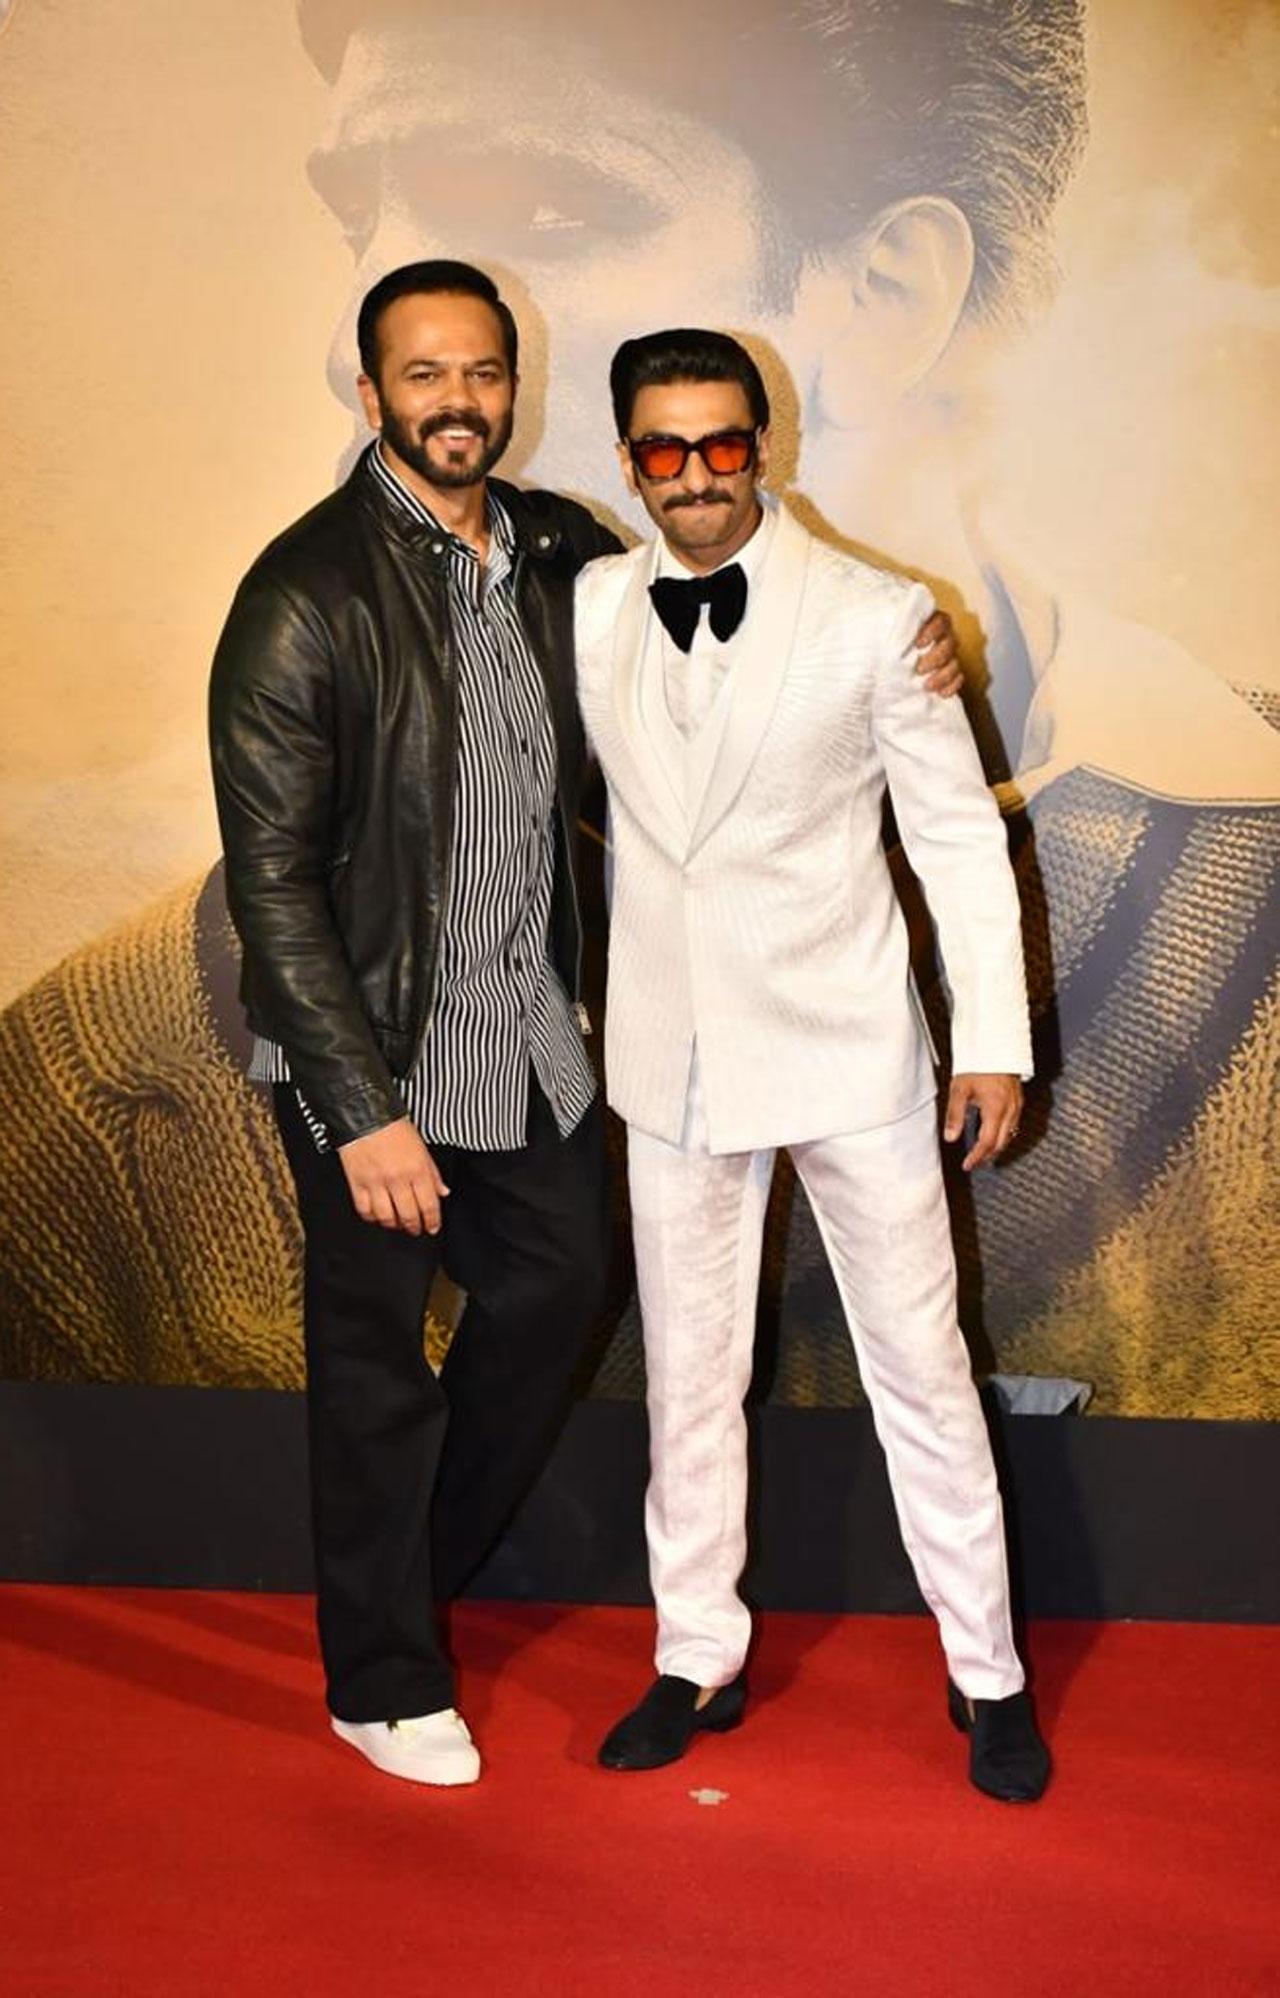 Ranveer Singh and Rohit Shetty set the box-office blazing with Simmba and Sooryavanshi and are now coming together for CirKus. But before that, the filmmaker watches Singh’s performance in 83 and let’s see what he says about his portrayal of Kapil Dev.